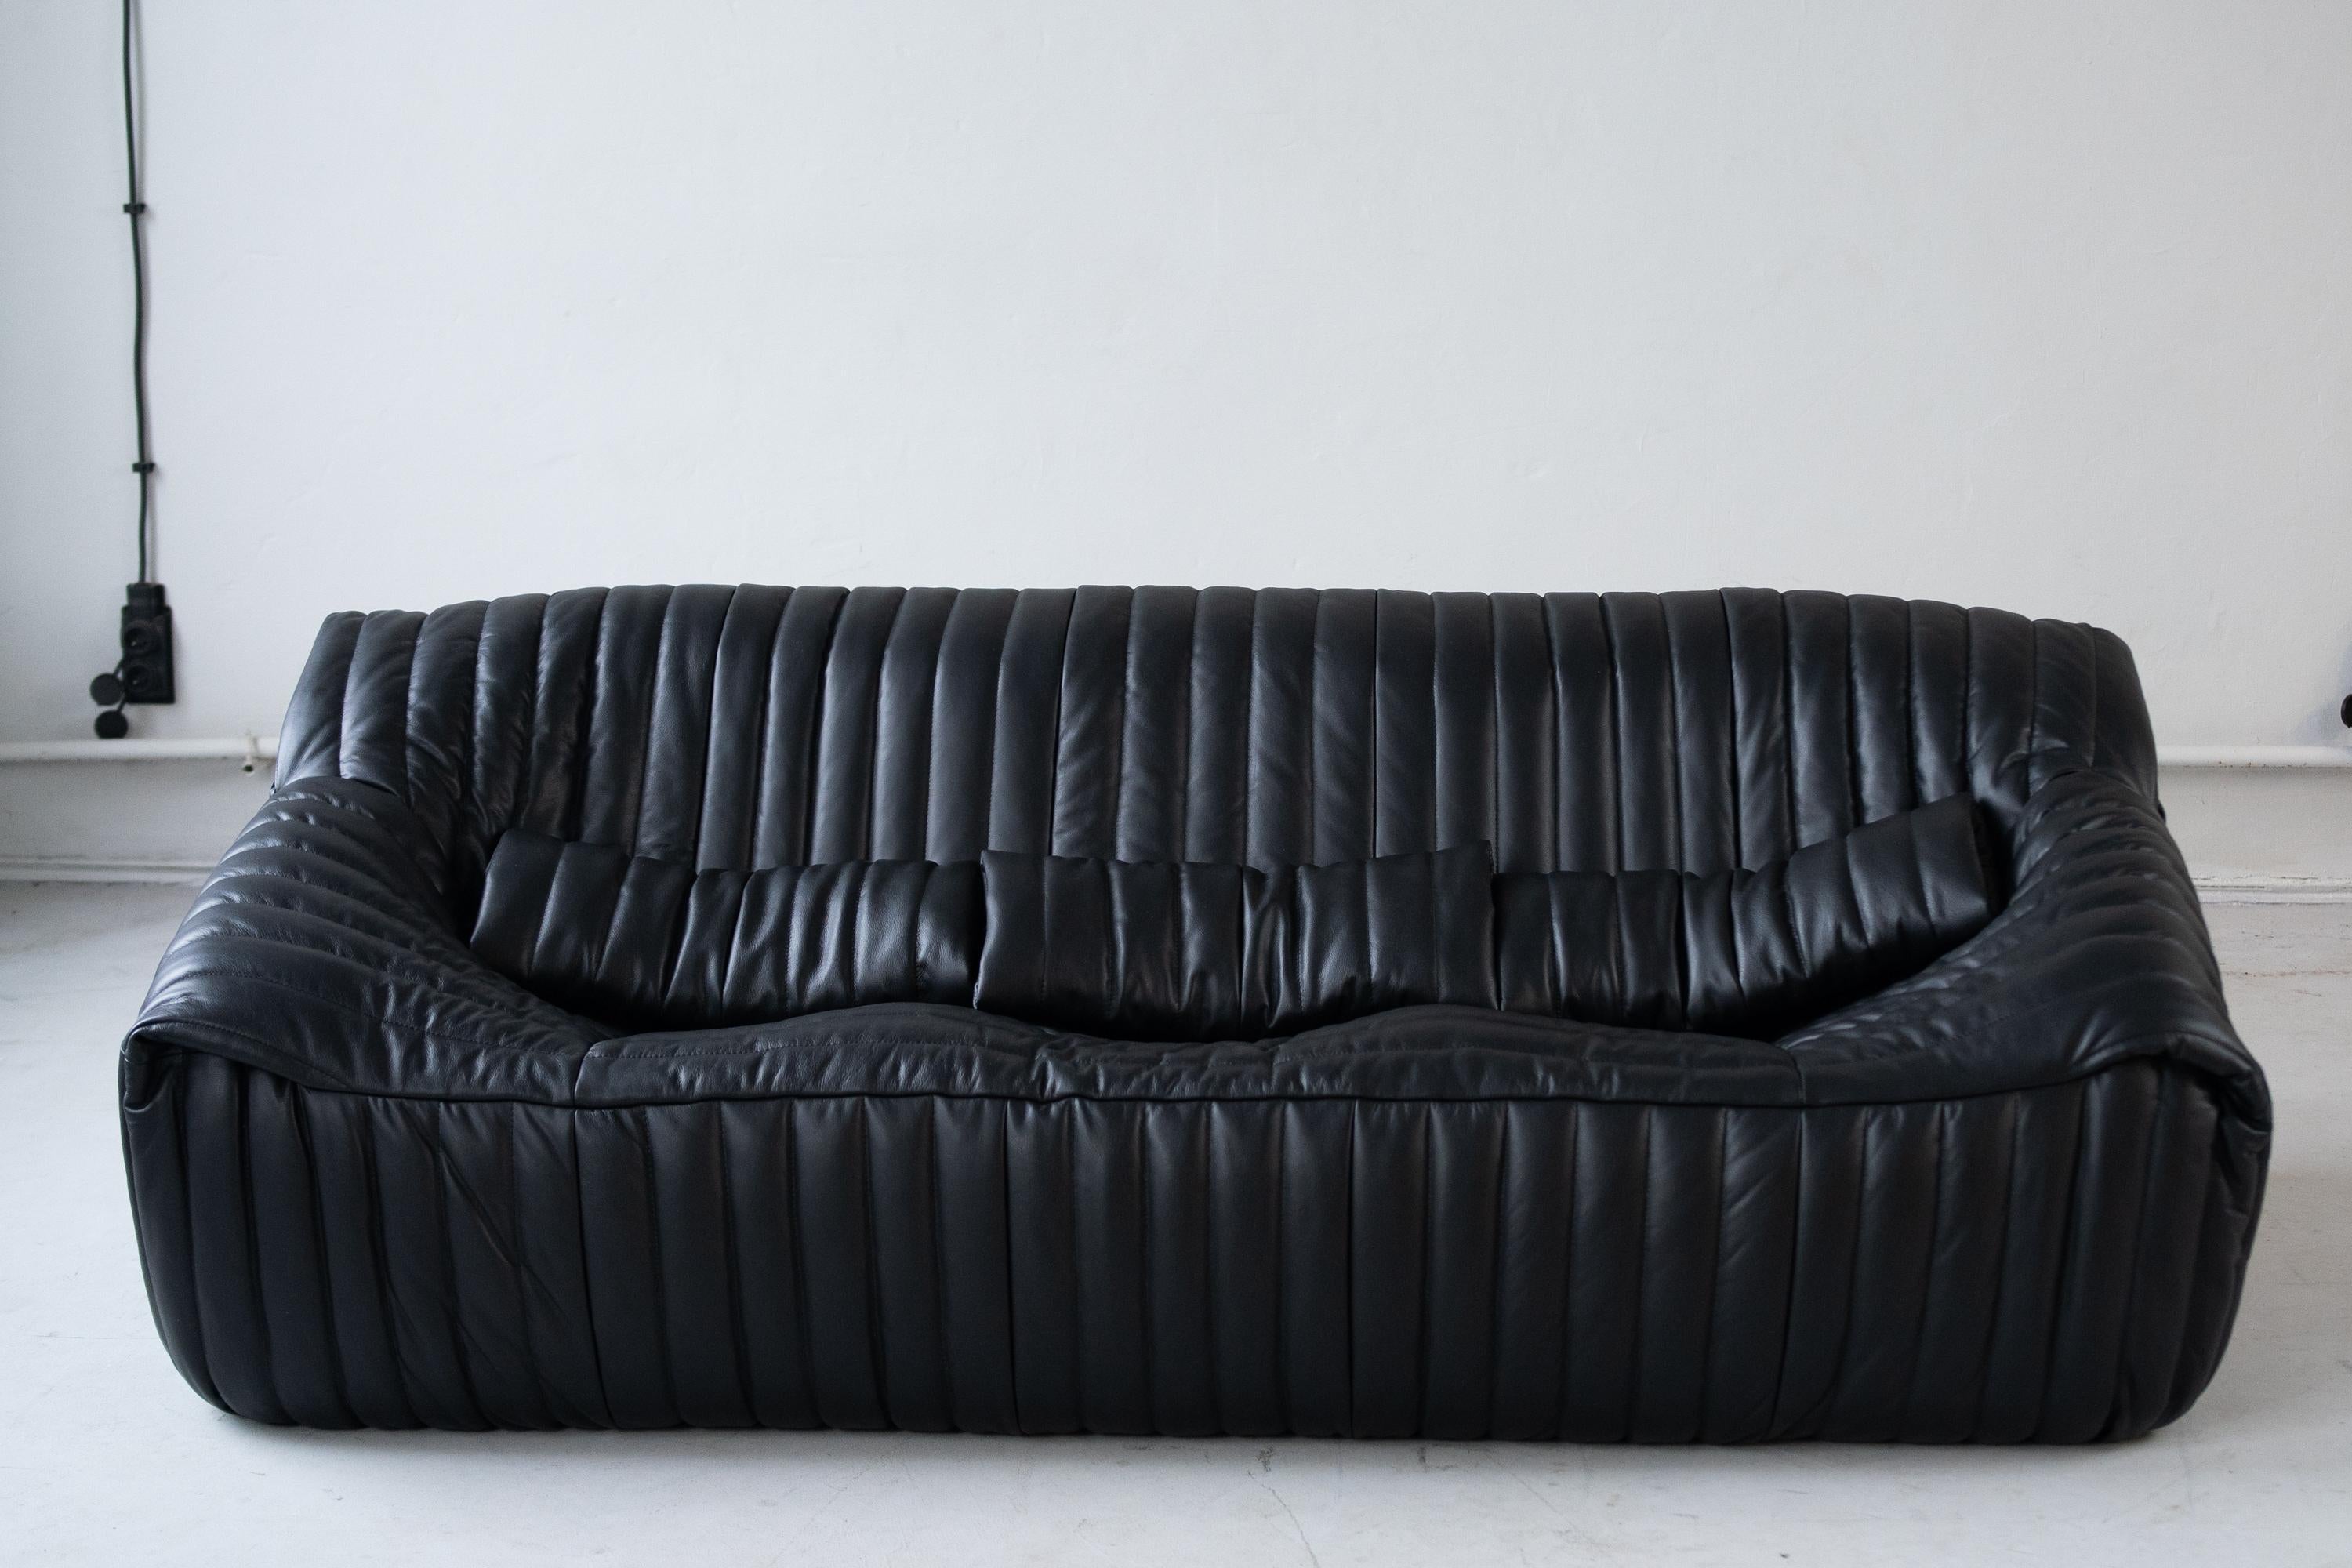  Sandra sofa  designed by Annie Hiéronimus for Cinna after she joined the Roset Bureau d’Etudes in 1976. 
 The inside of the sofa consists entirely of polyether foam and is, therefore, feather-light and above all very comfortable. 
This set is